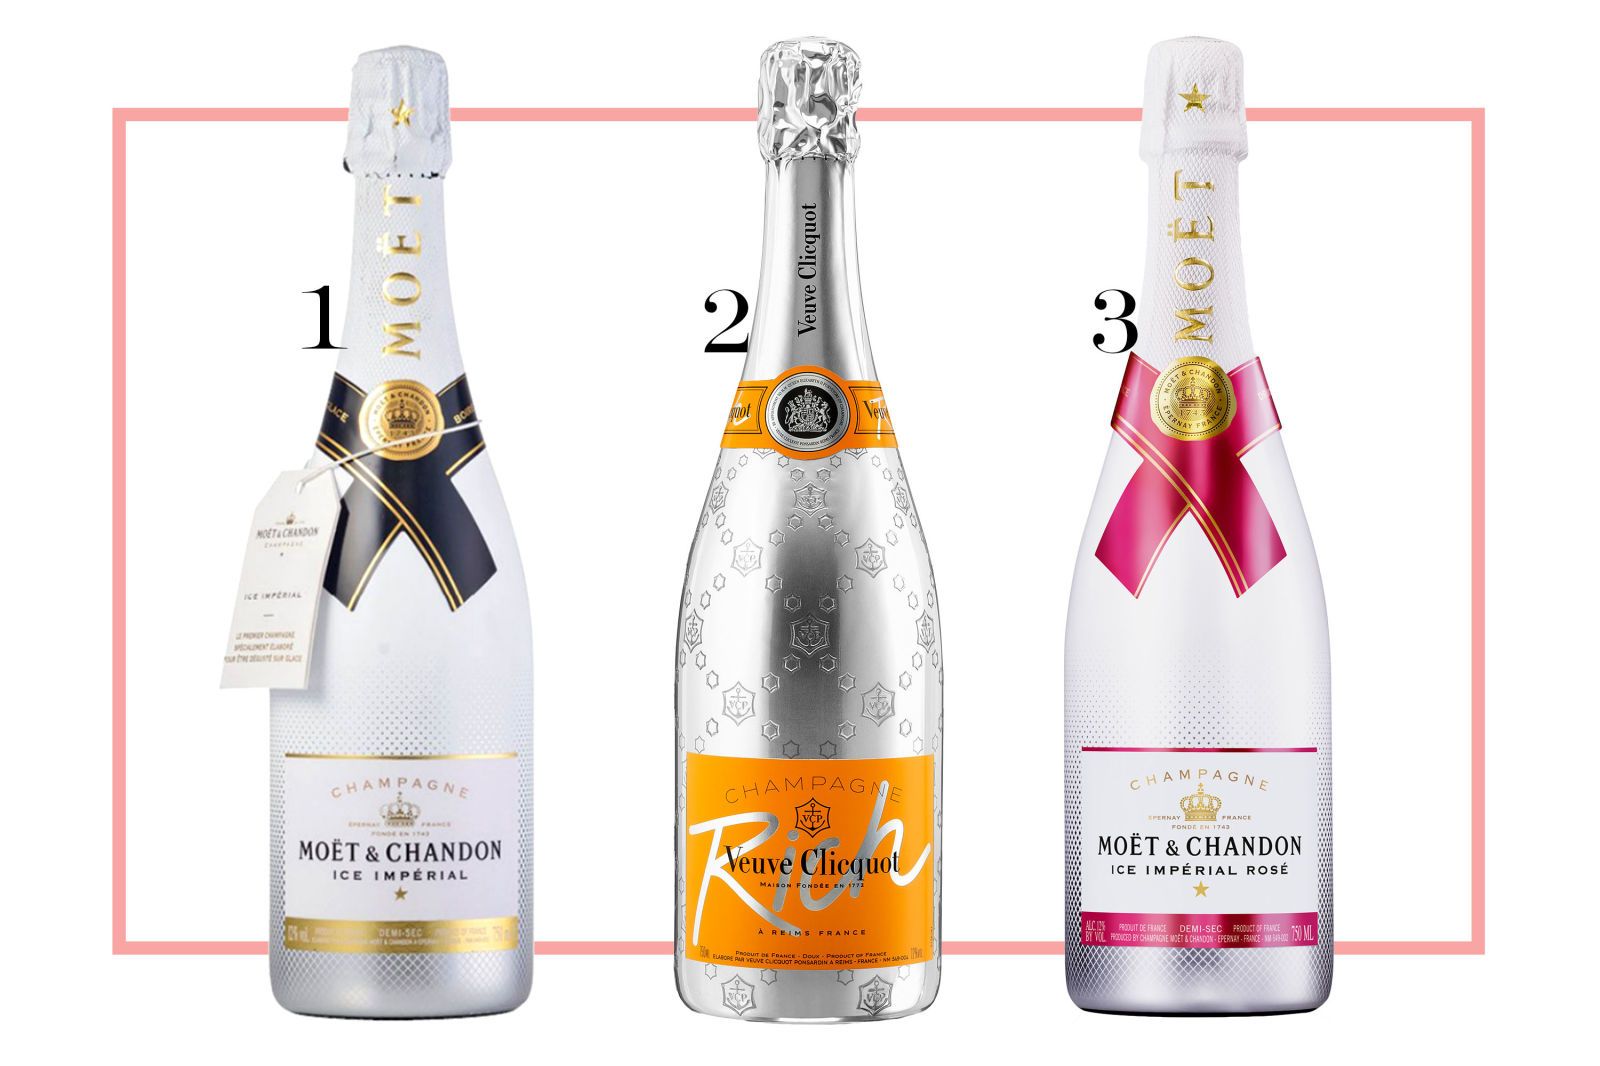 Moet & Chandon Ice Imperial, Refreshing and Fruity Champagne